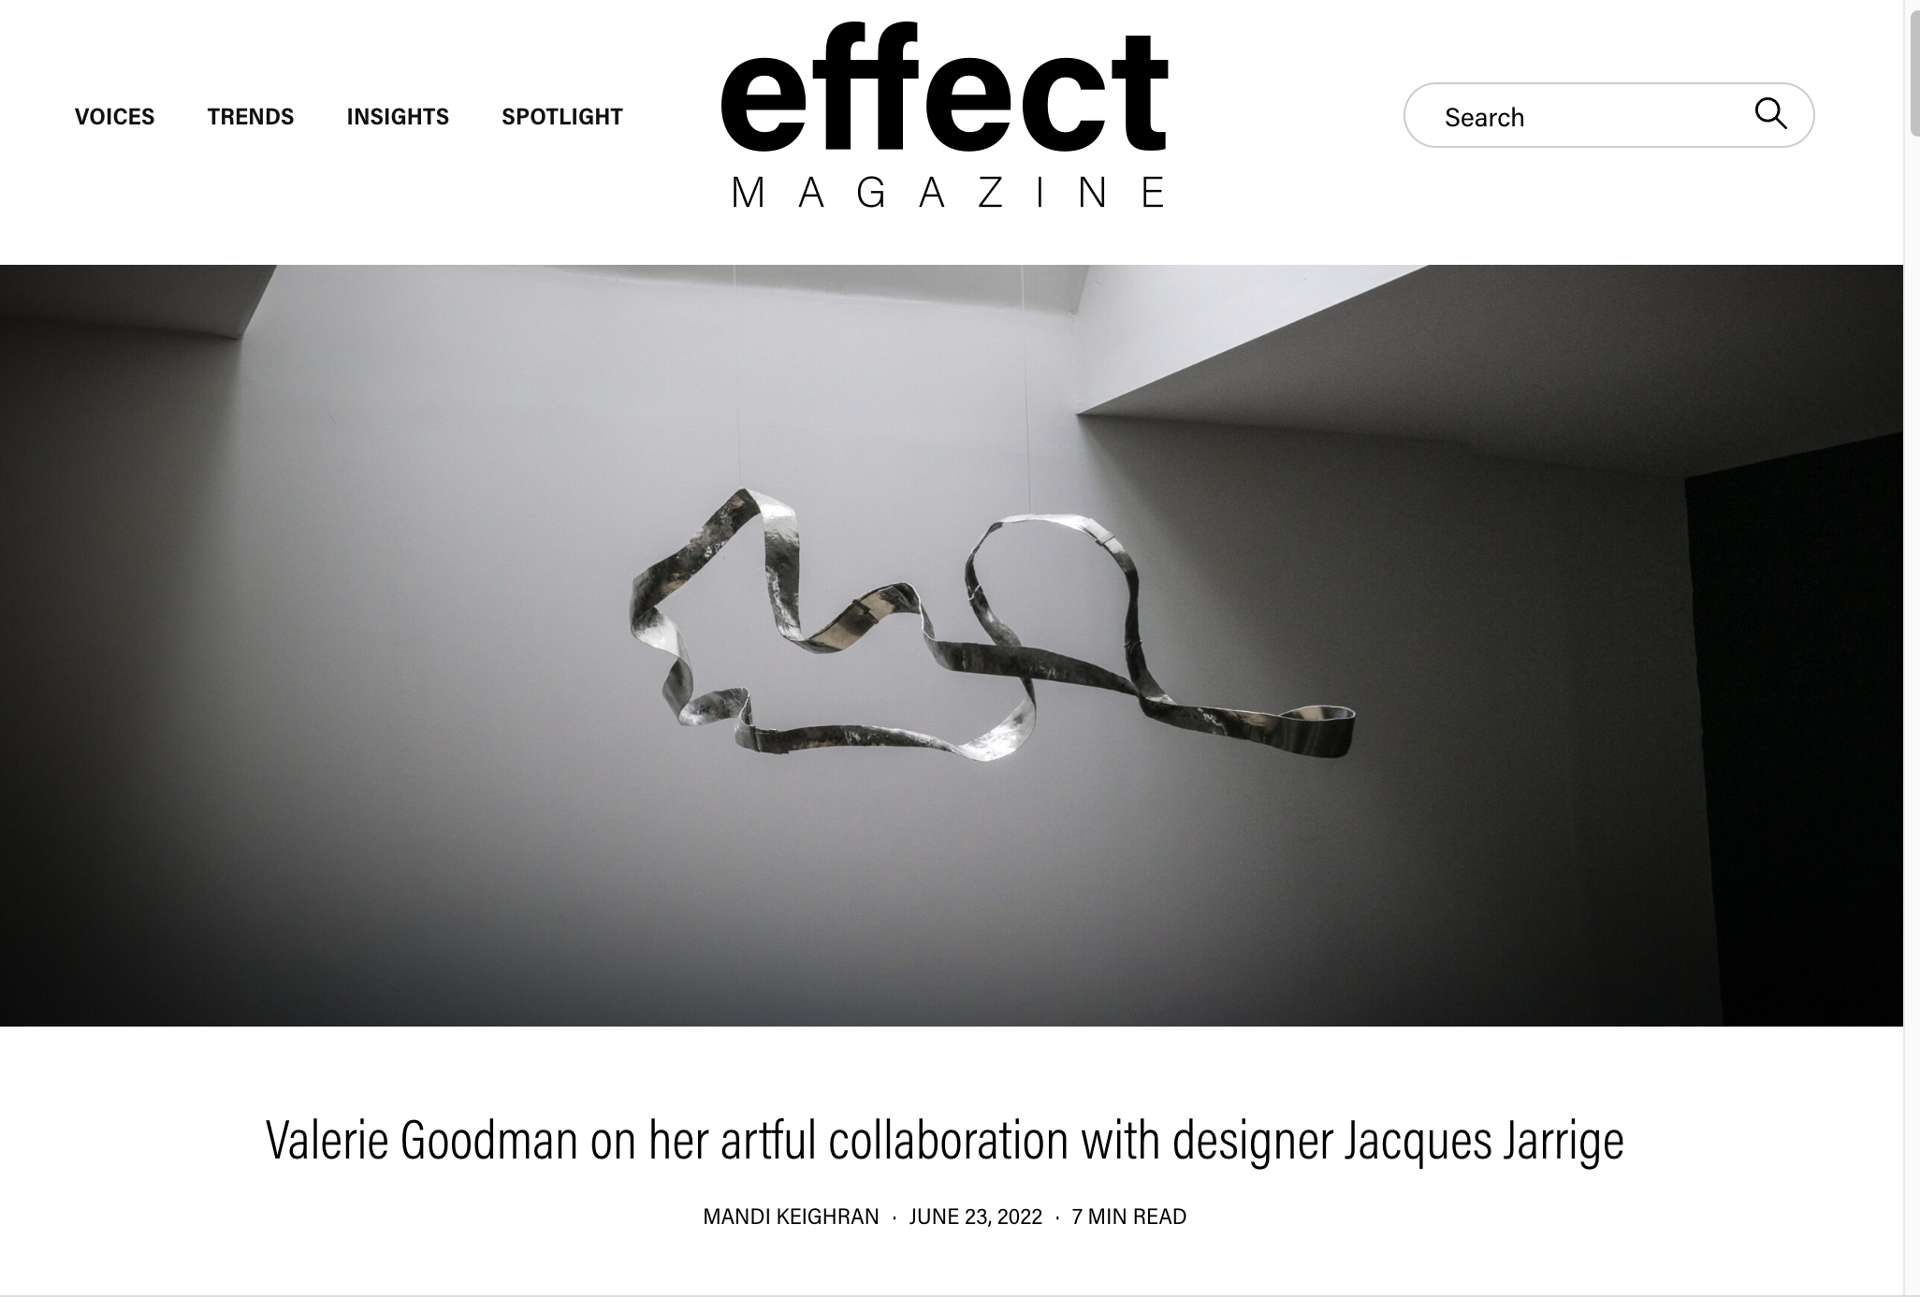 Effect Magazine June 23 by Jacques Jarrige